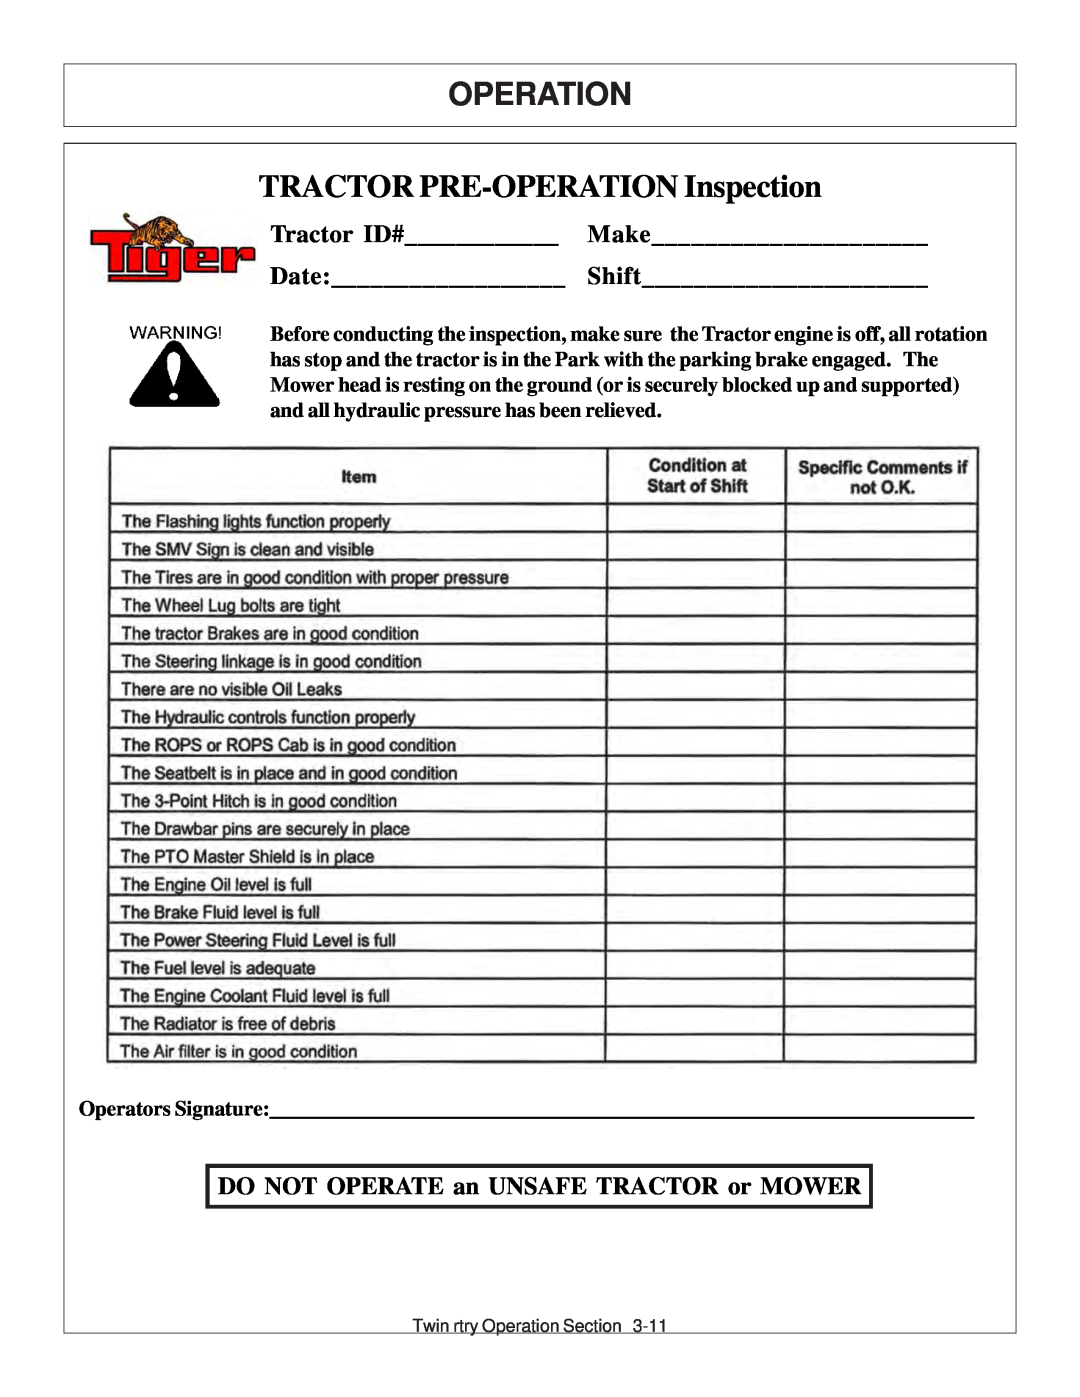 Tiger Products Co., Ltd 6020009 manual TRACTOR PRE-OPERATION Inspection, Operation, Tractor ID# Make Date Shift 